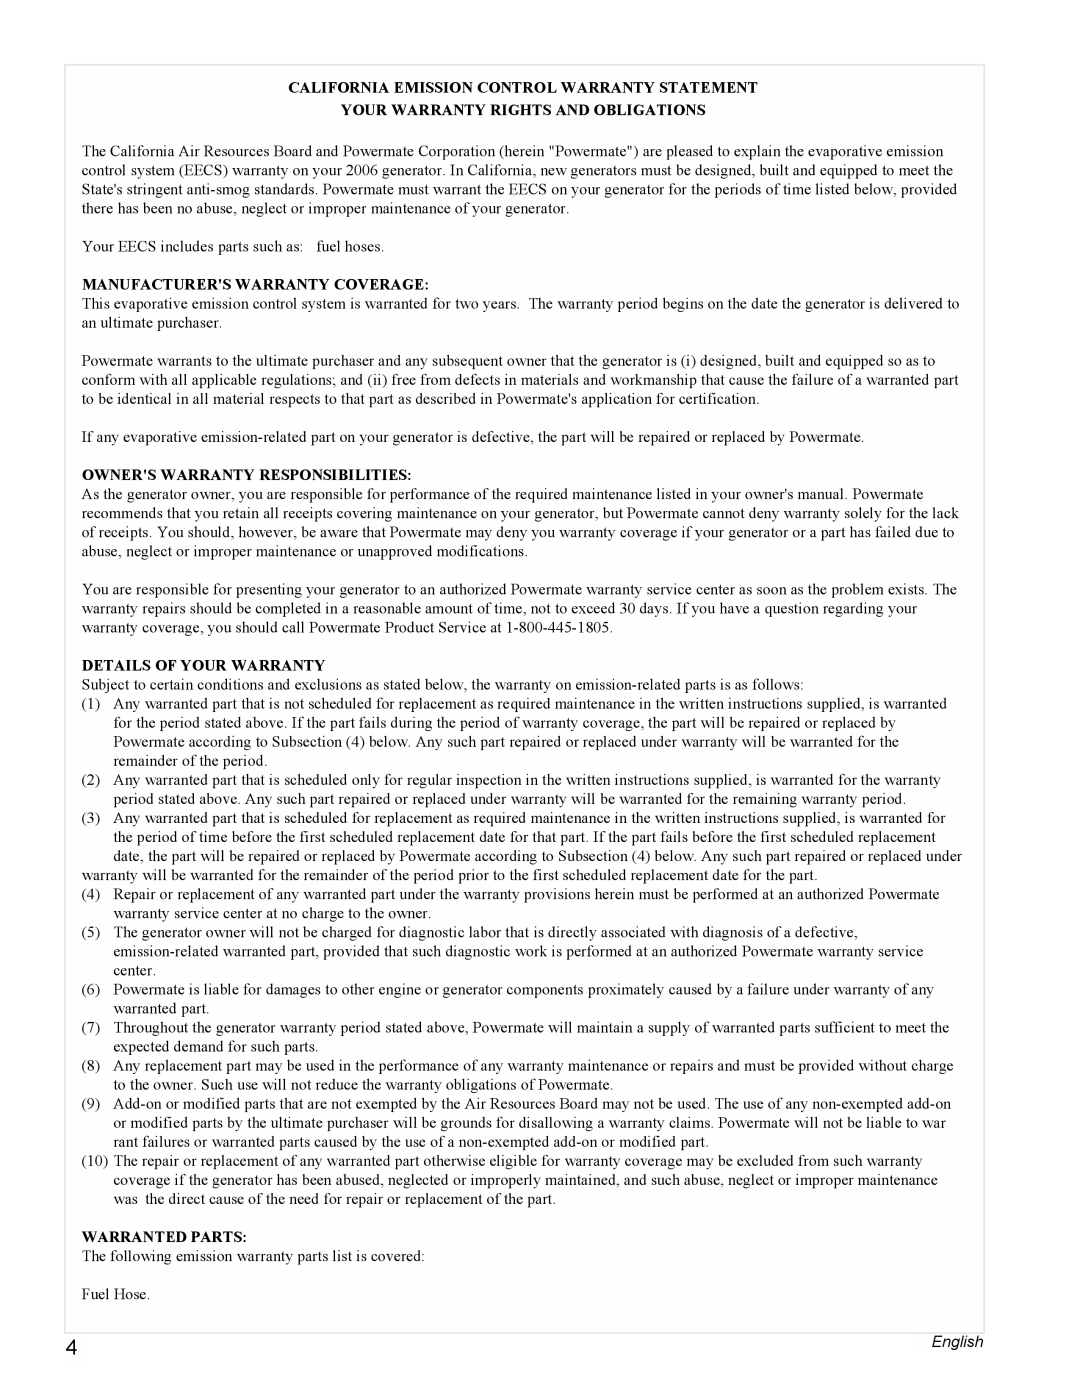 Powermate PMC435250 California Emission Control Warranty Statement, Your Warranty Rights And Obligations, Warranted Parts 